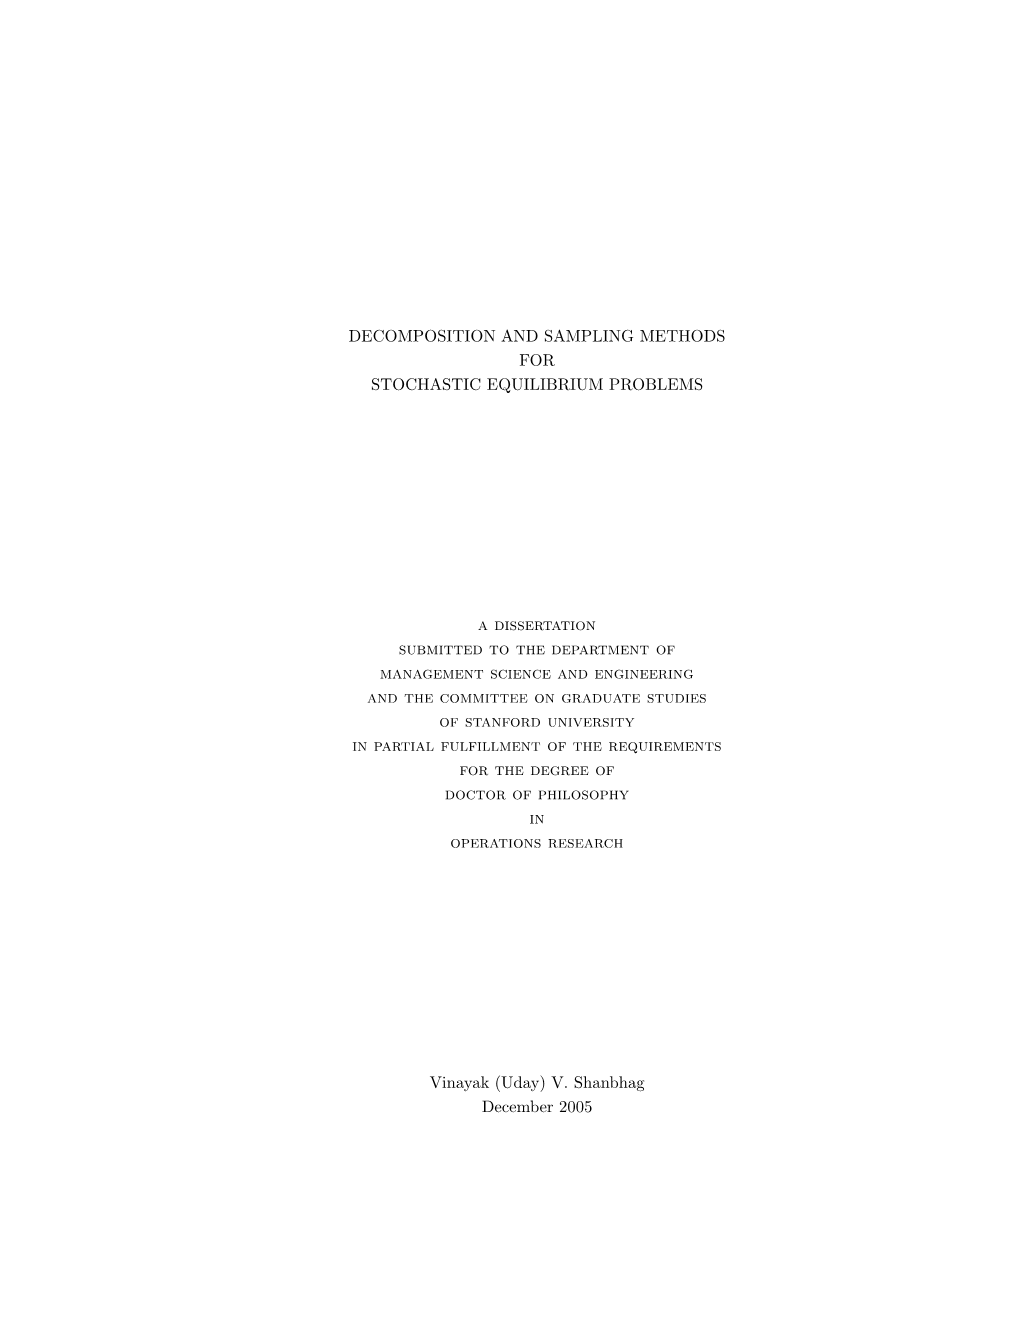 Decomposition and Sampling Methods for Stochastic Equilibrium Problems